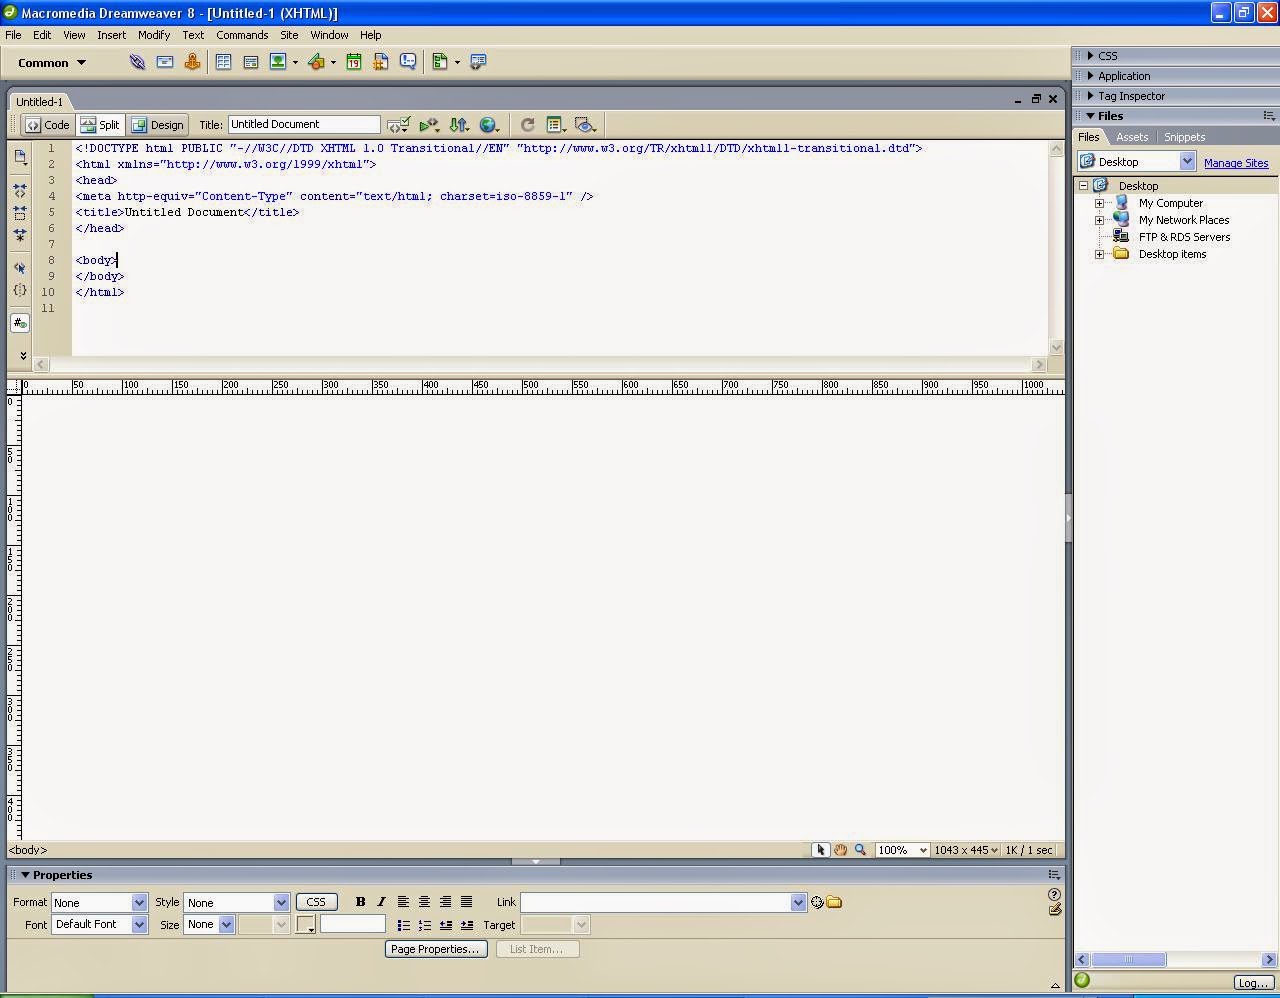 Free Download Dreamweaver 8 Full Version With Crack